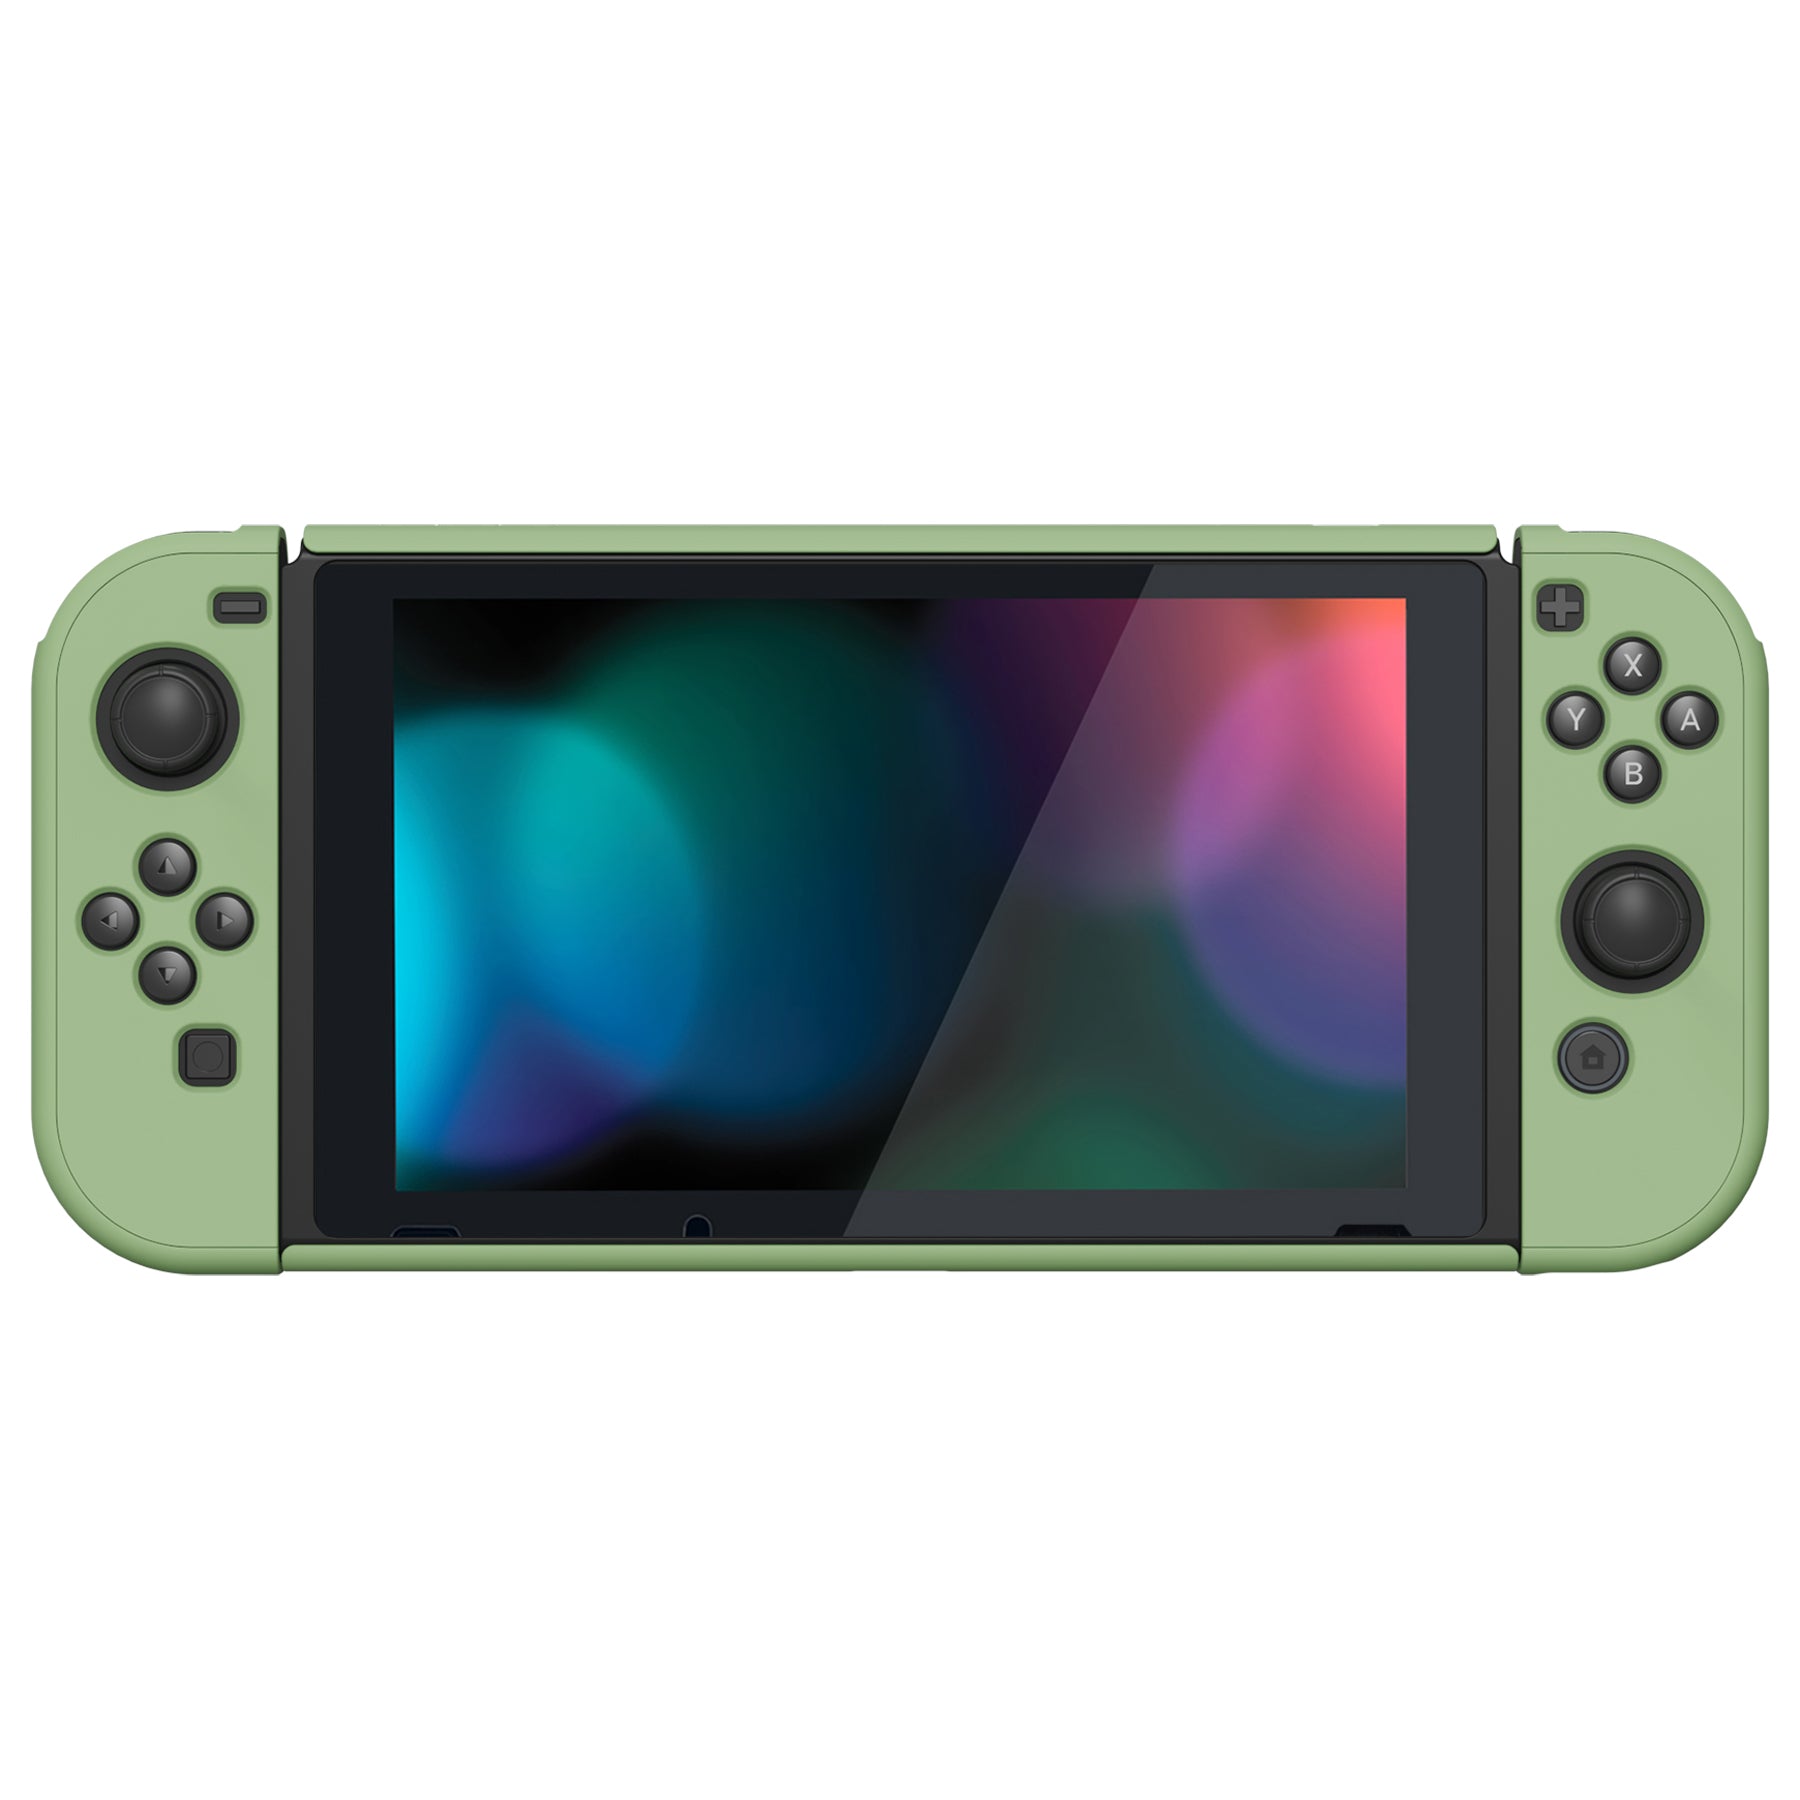 PlayVital UPGRADED Dockable Case Grip Cover for NS Switch, Ergonomic Protective Case for NS Switch, Separable Protector Hard Shell for Joycon - Matcha Green - ANSP3005 PlayVital